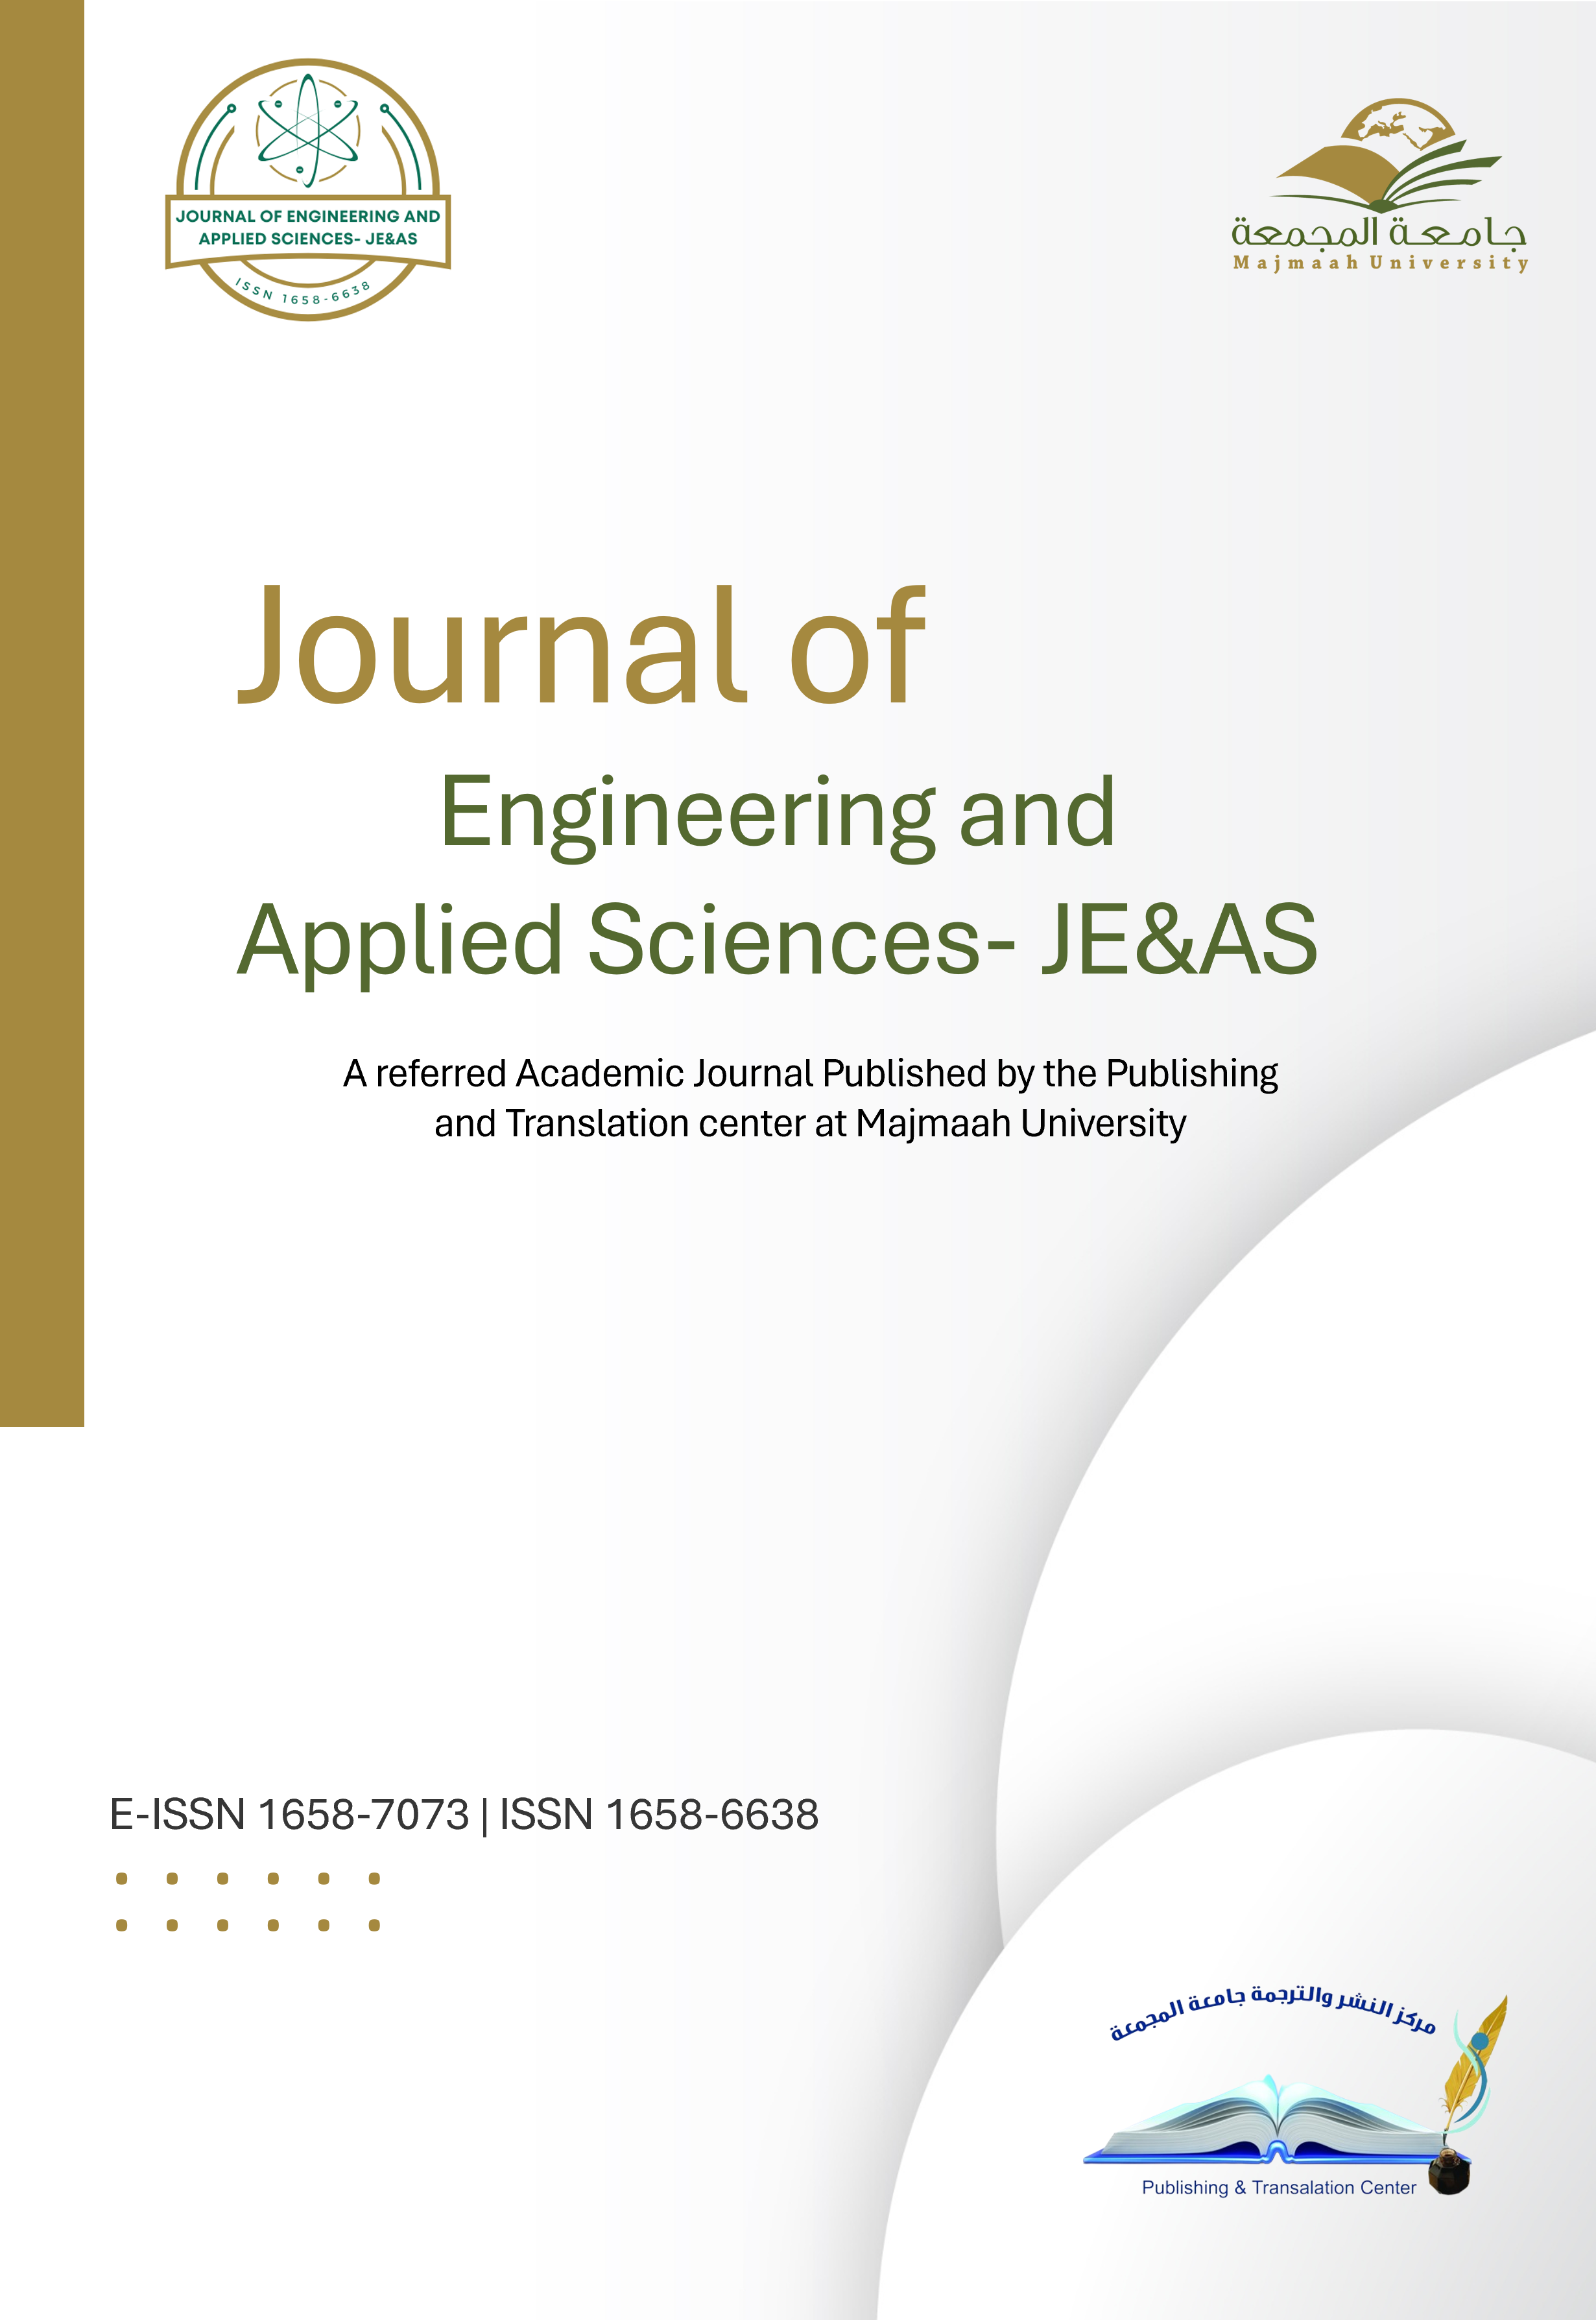 Journal of Engineering and Applied Sciences-JE&AS